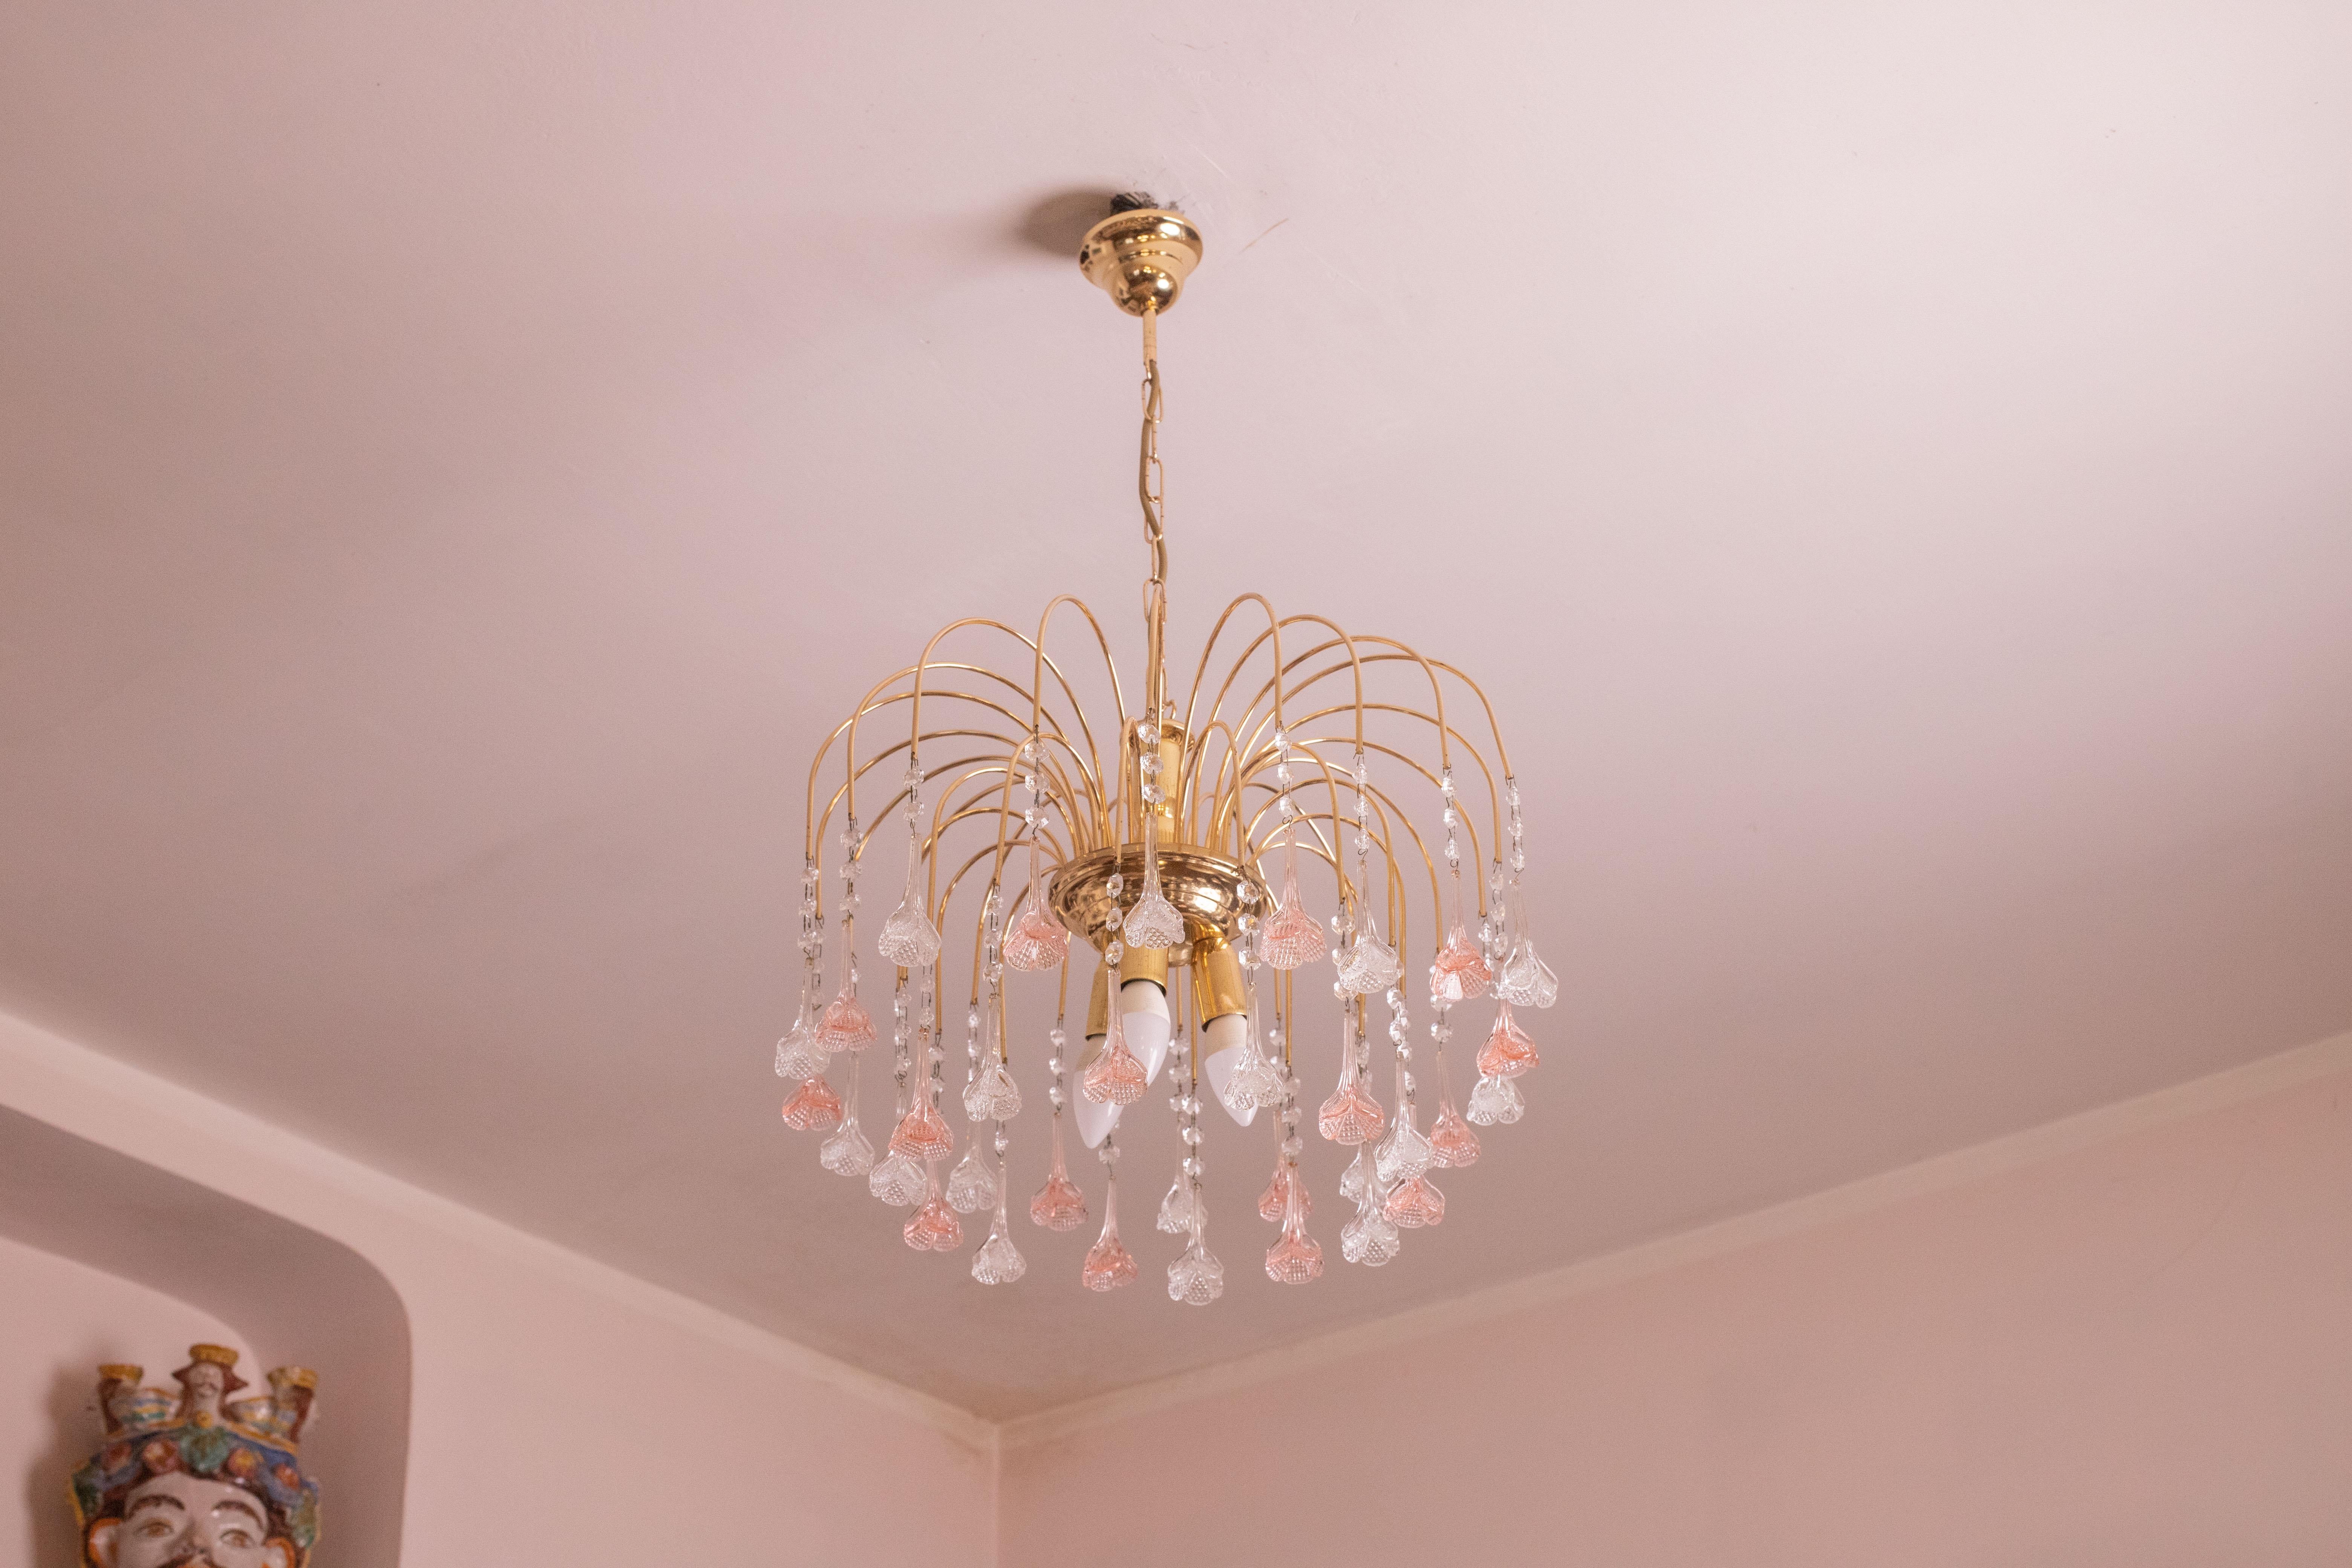 Brigitte Bardot, Pink and Trasparent Murano Flowers Chandelier, 1970s For Sale 3